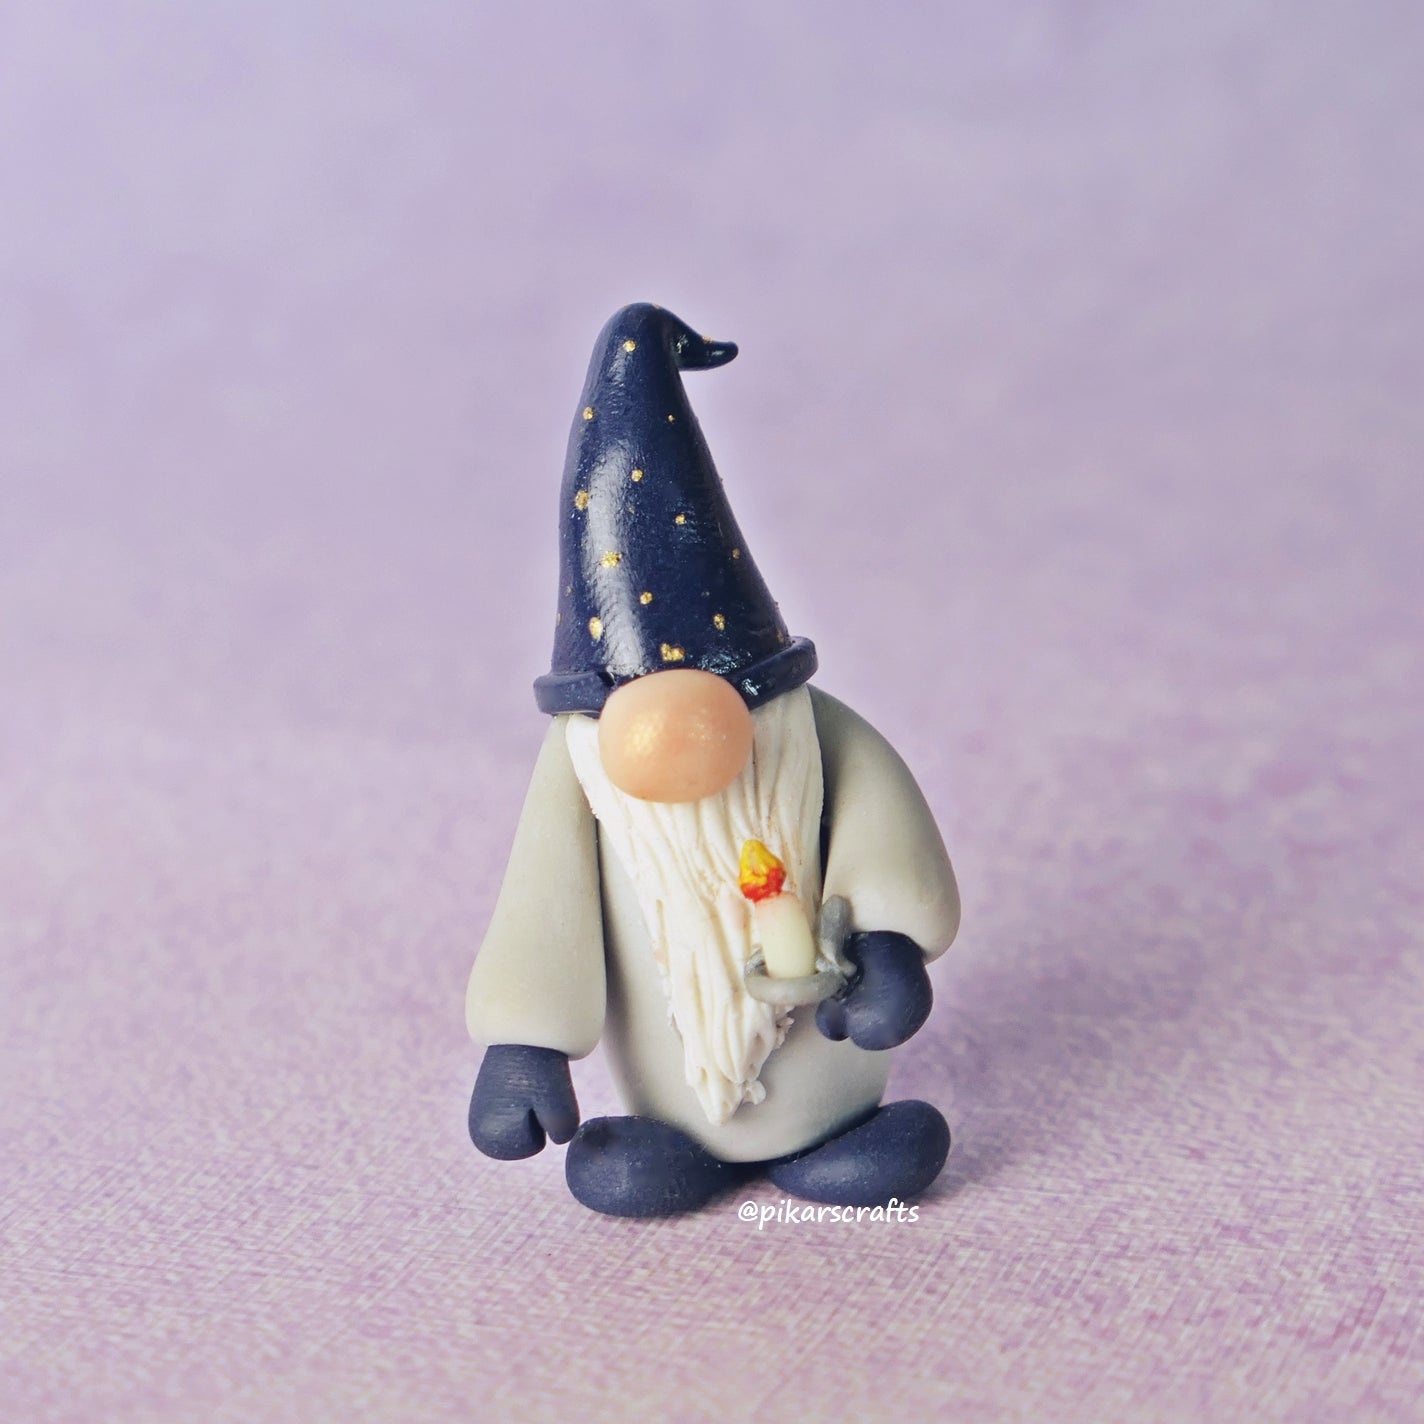 Miniature Winter Gnome (Gonk) 'Lior' with Glow in the dark candle